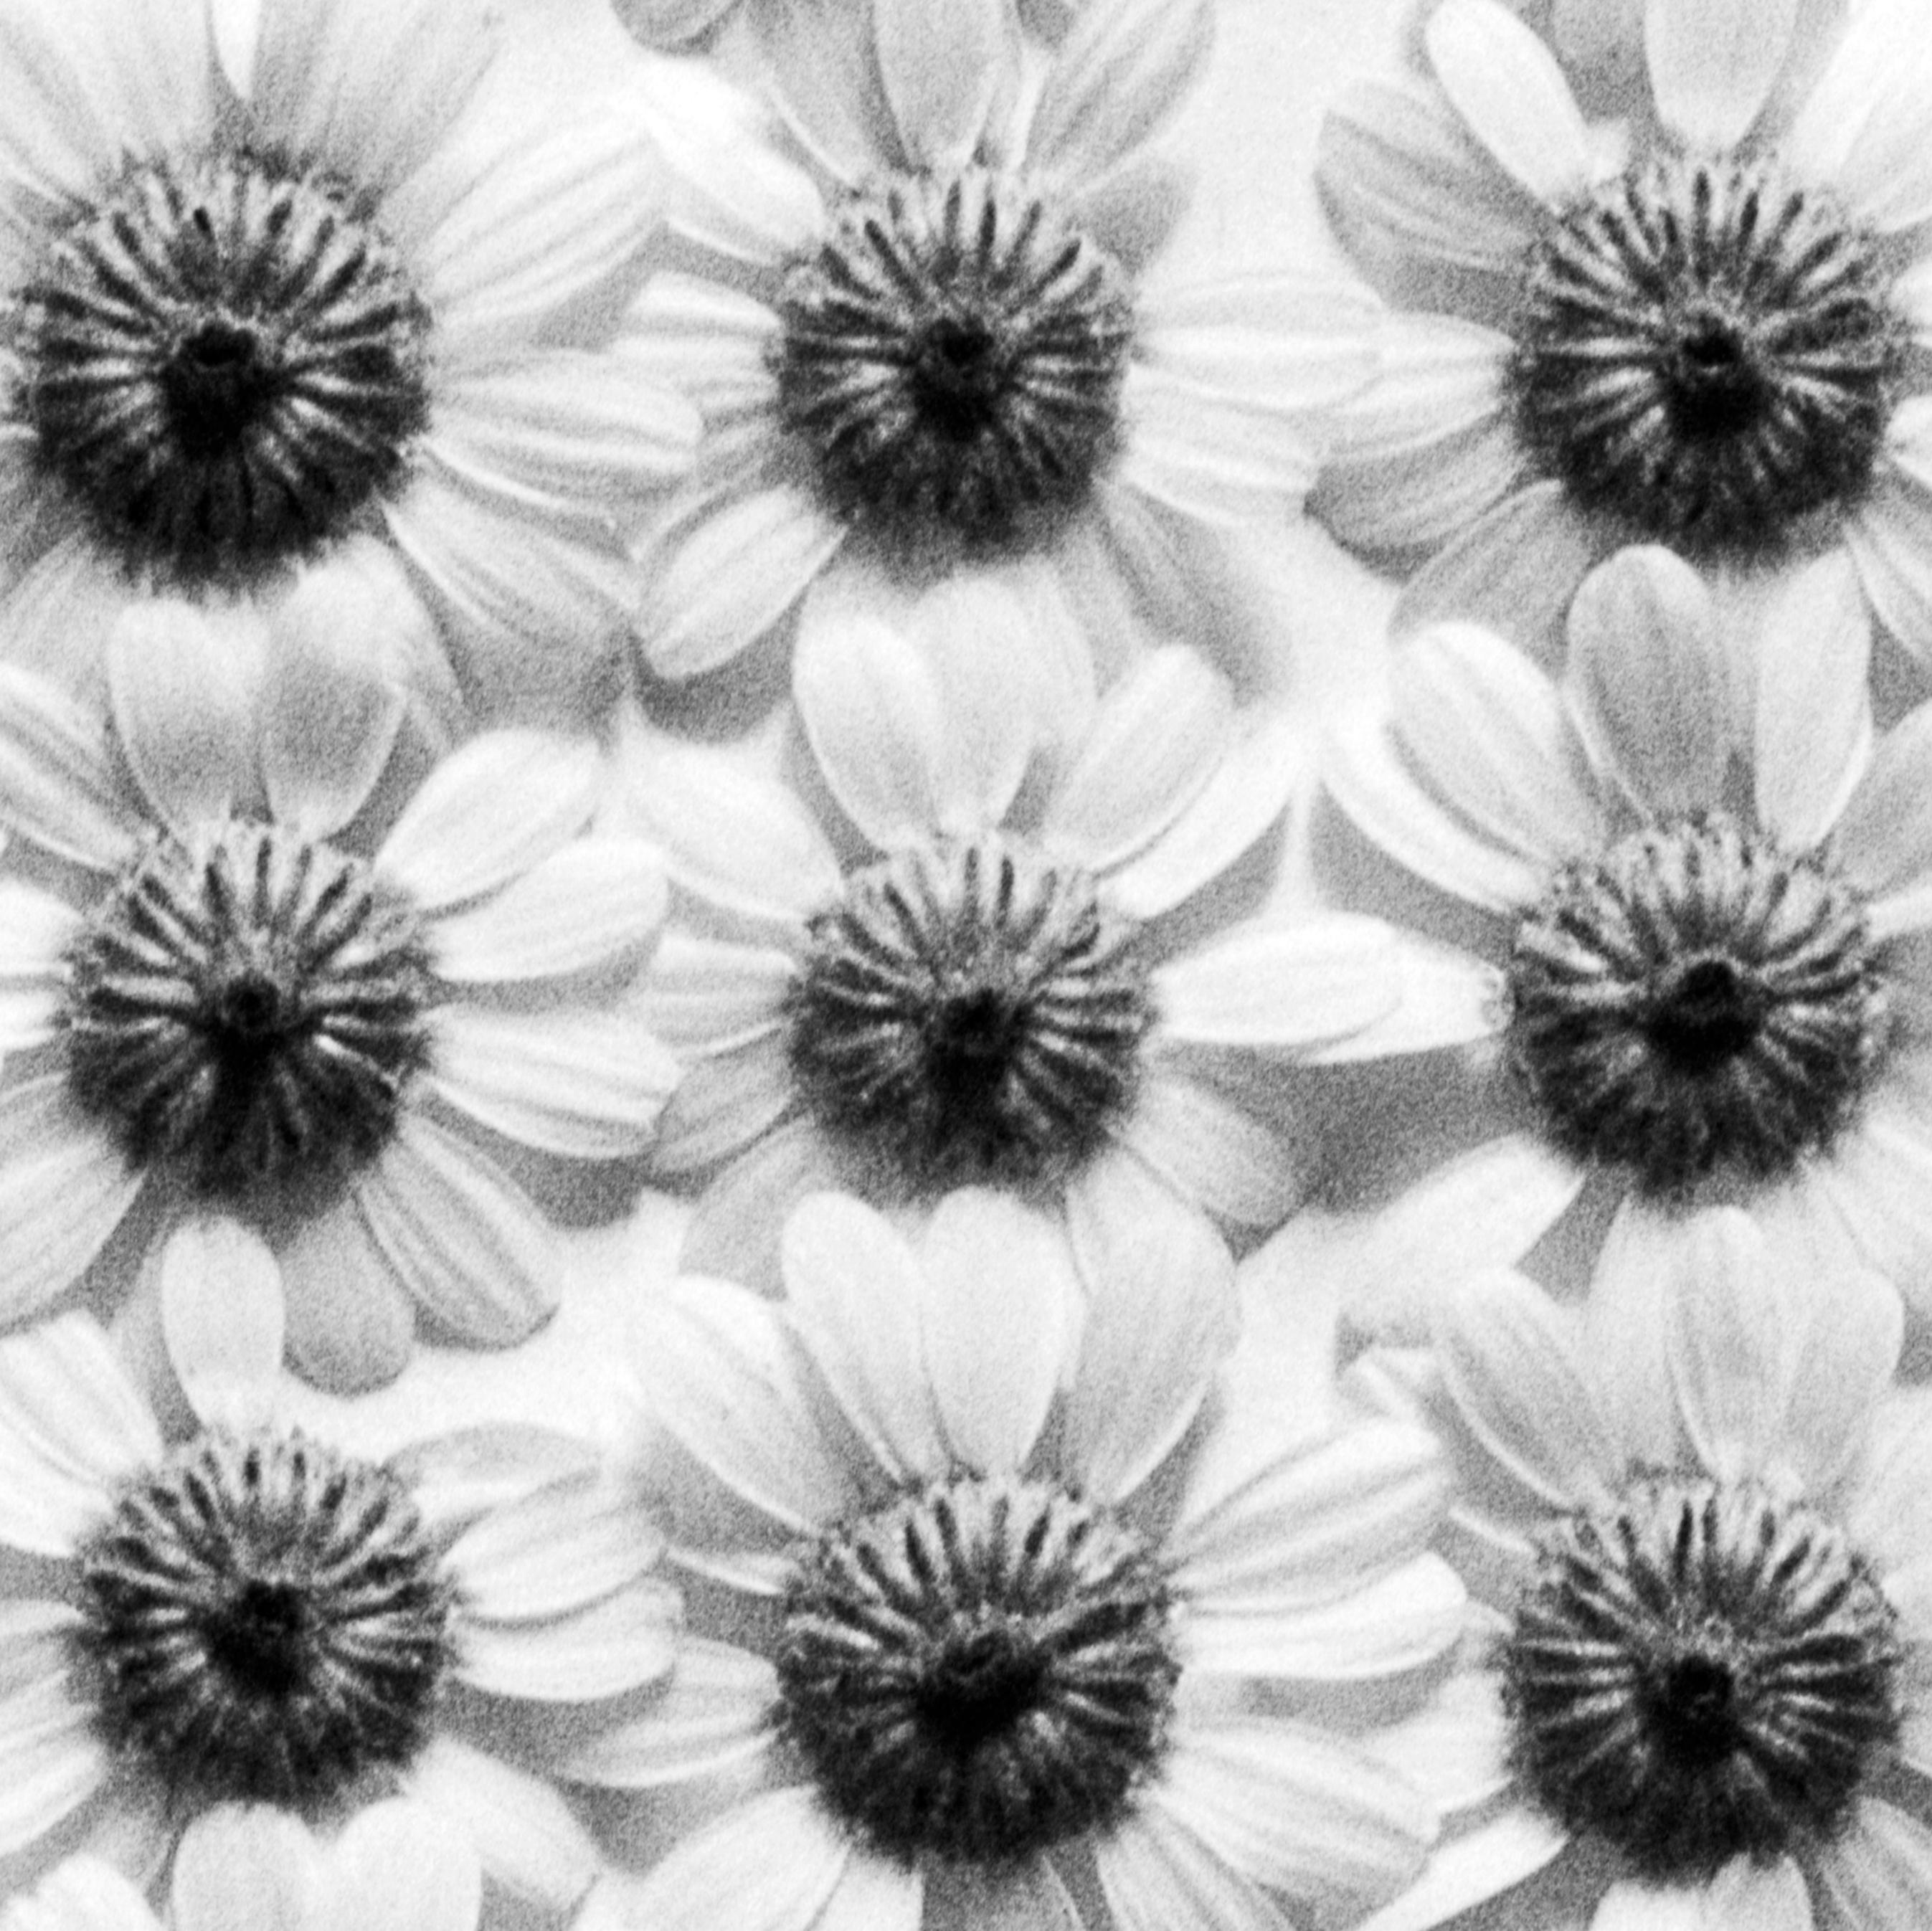 Ramunės No.2- Abstract analogue black and white floral photography, Edition of 5 - Contemporary Photograph by Ugne Pouwell